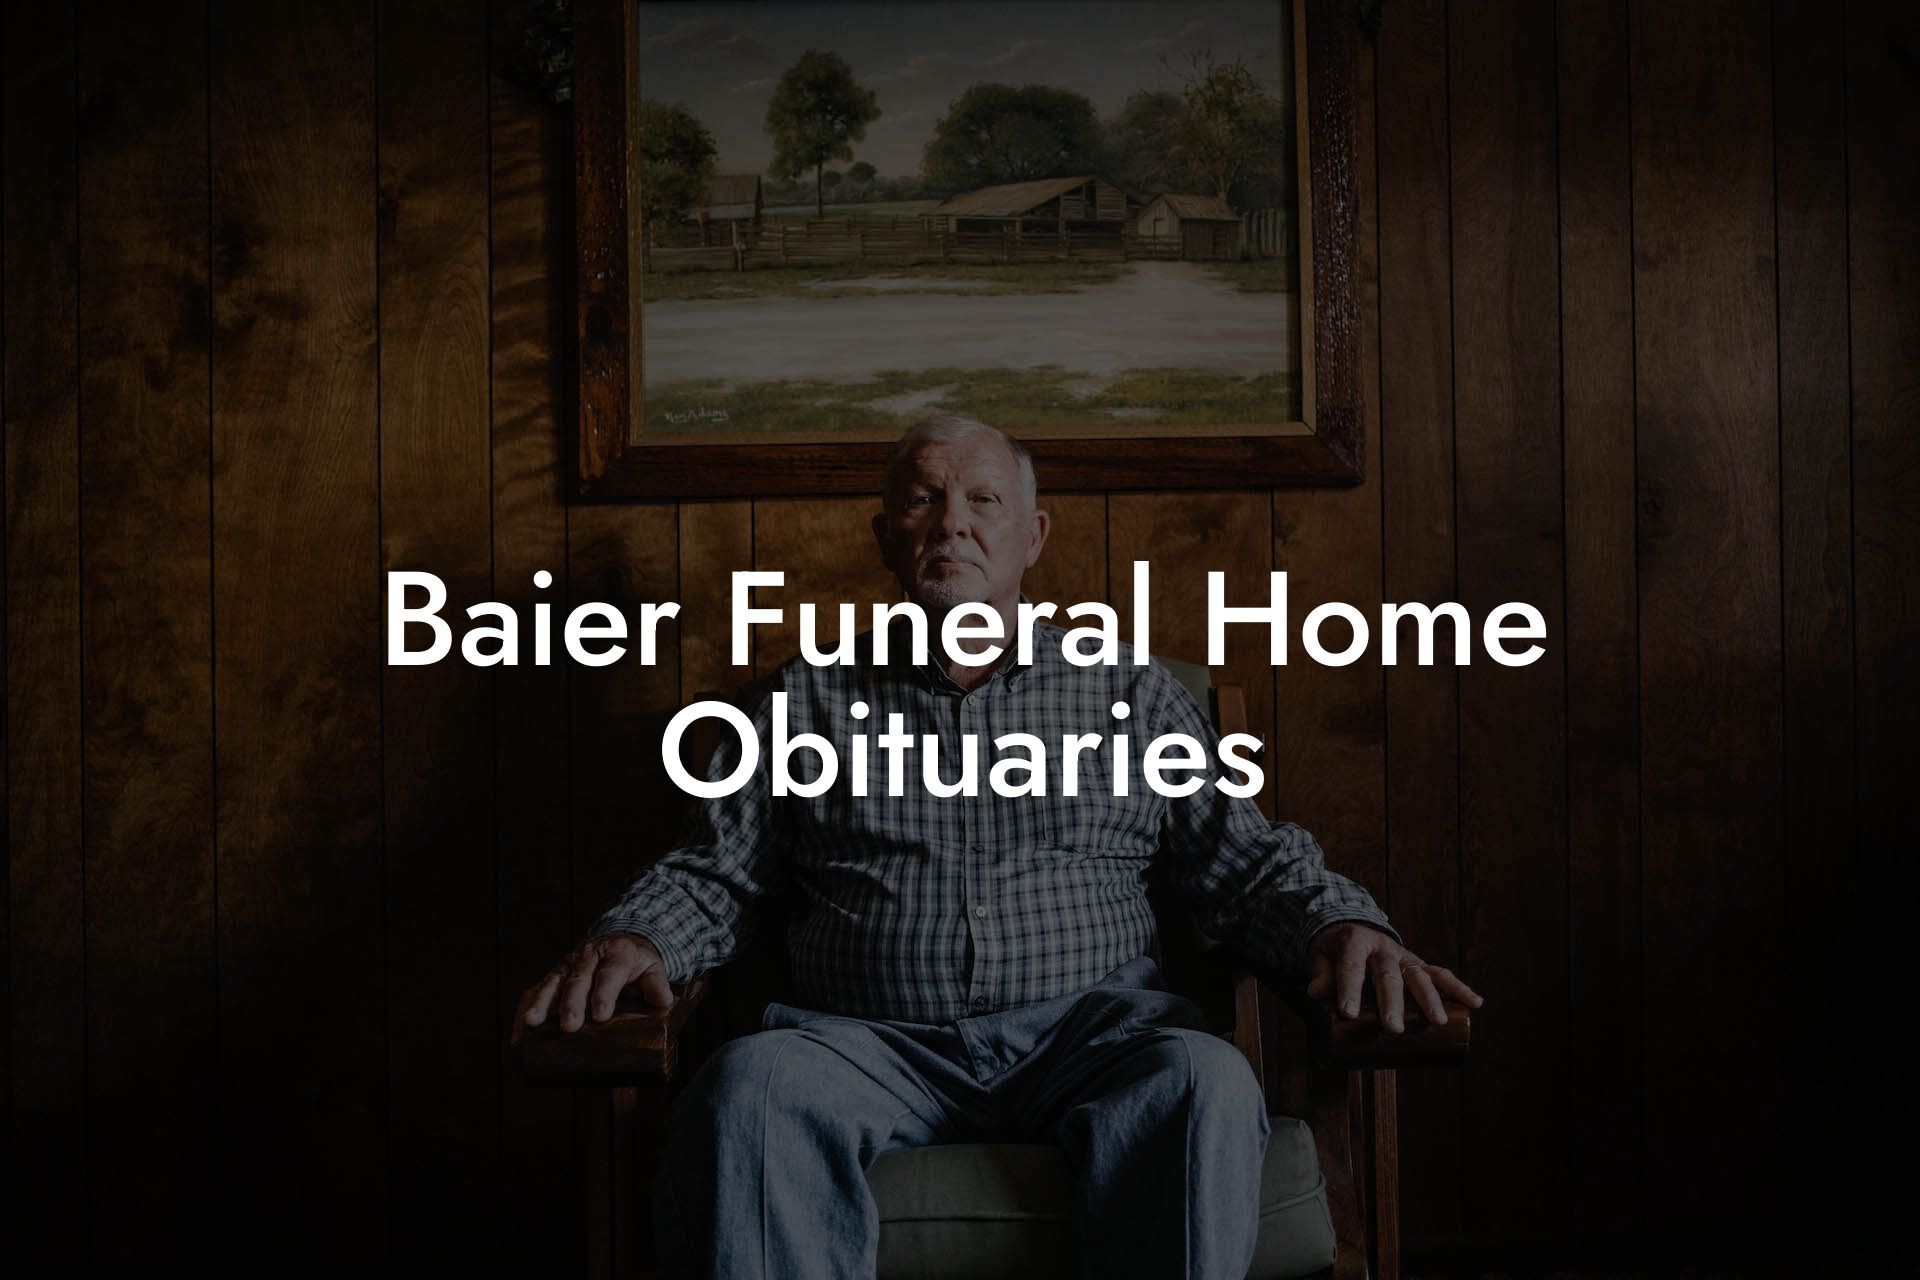 Baier Funeral Home Obituaries